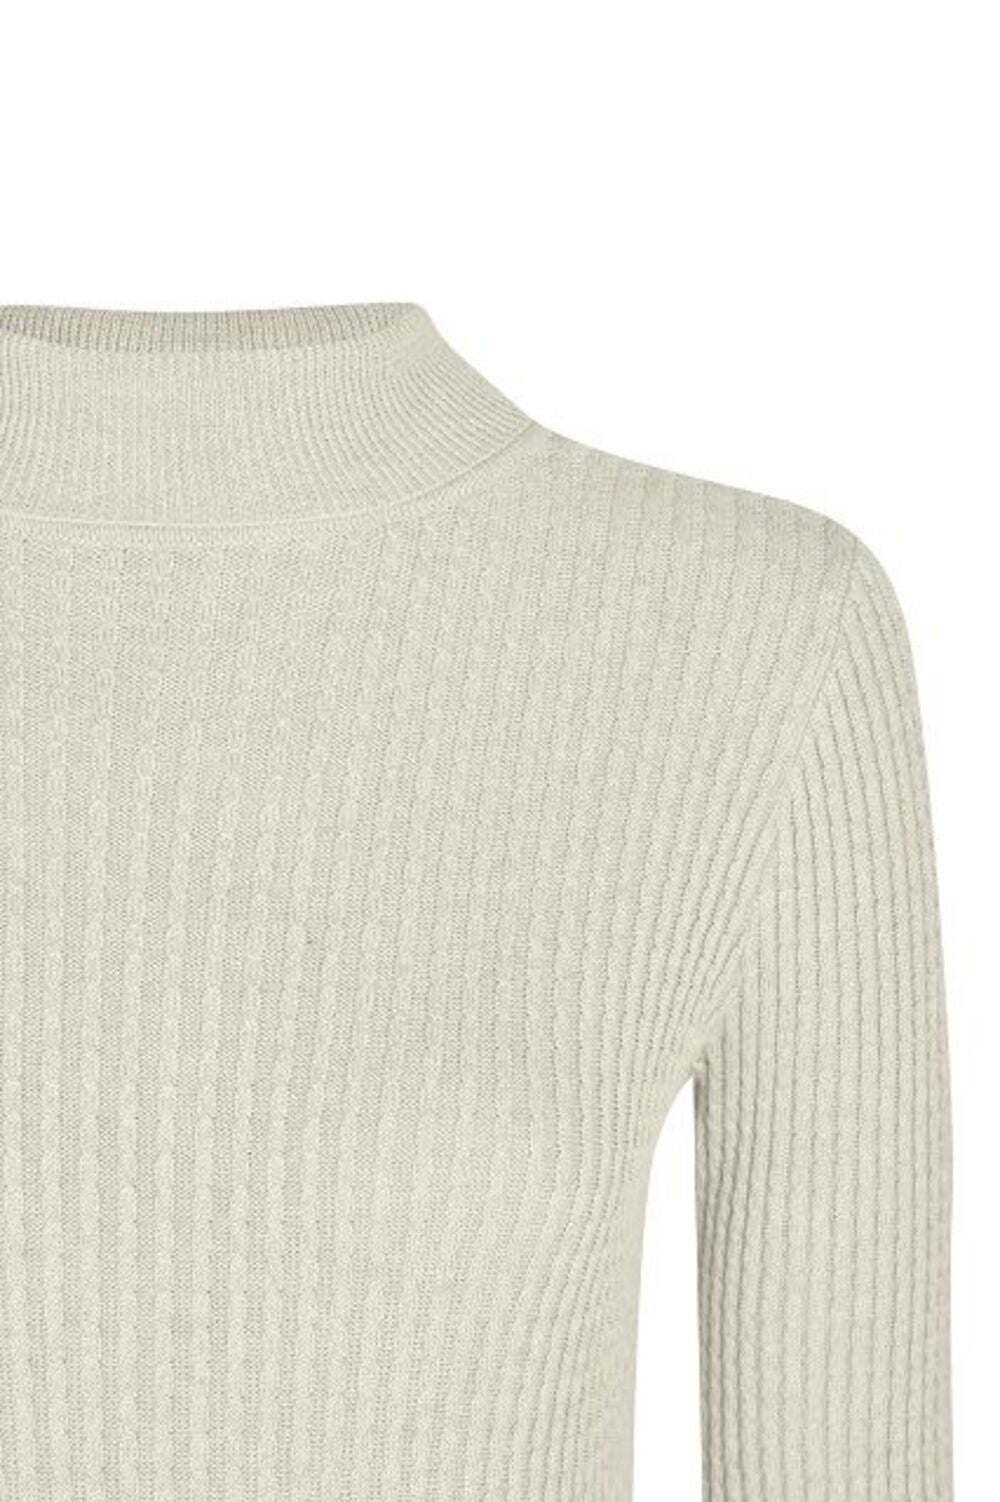 Women's knitted sweater Roding